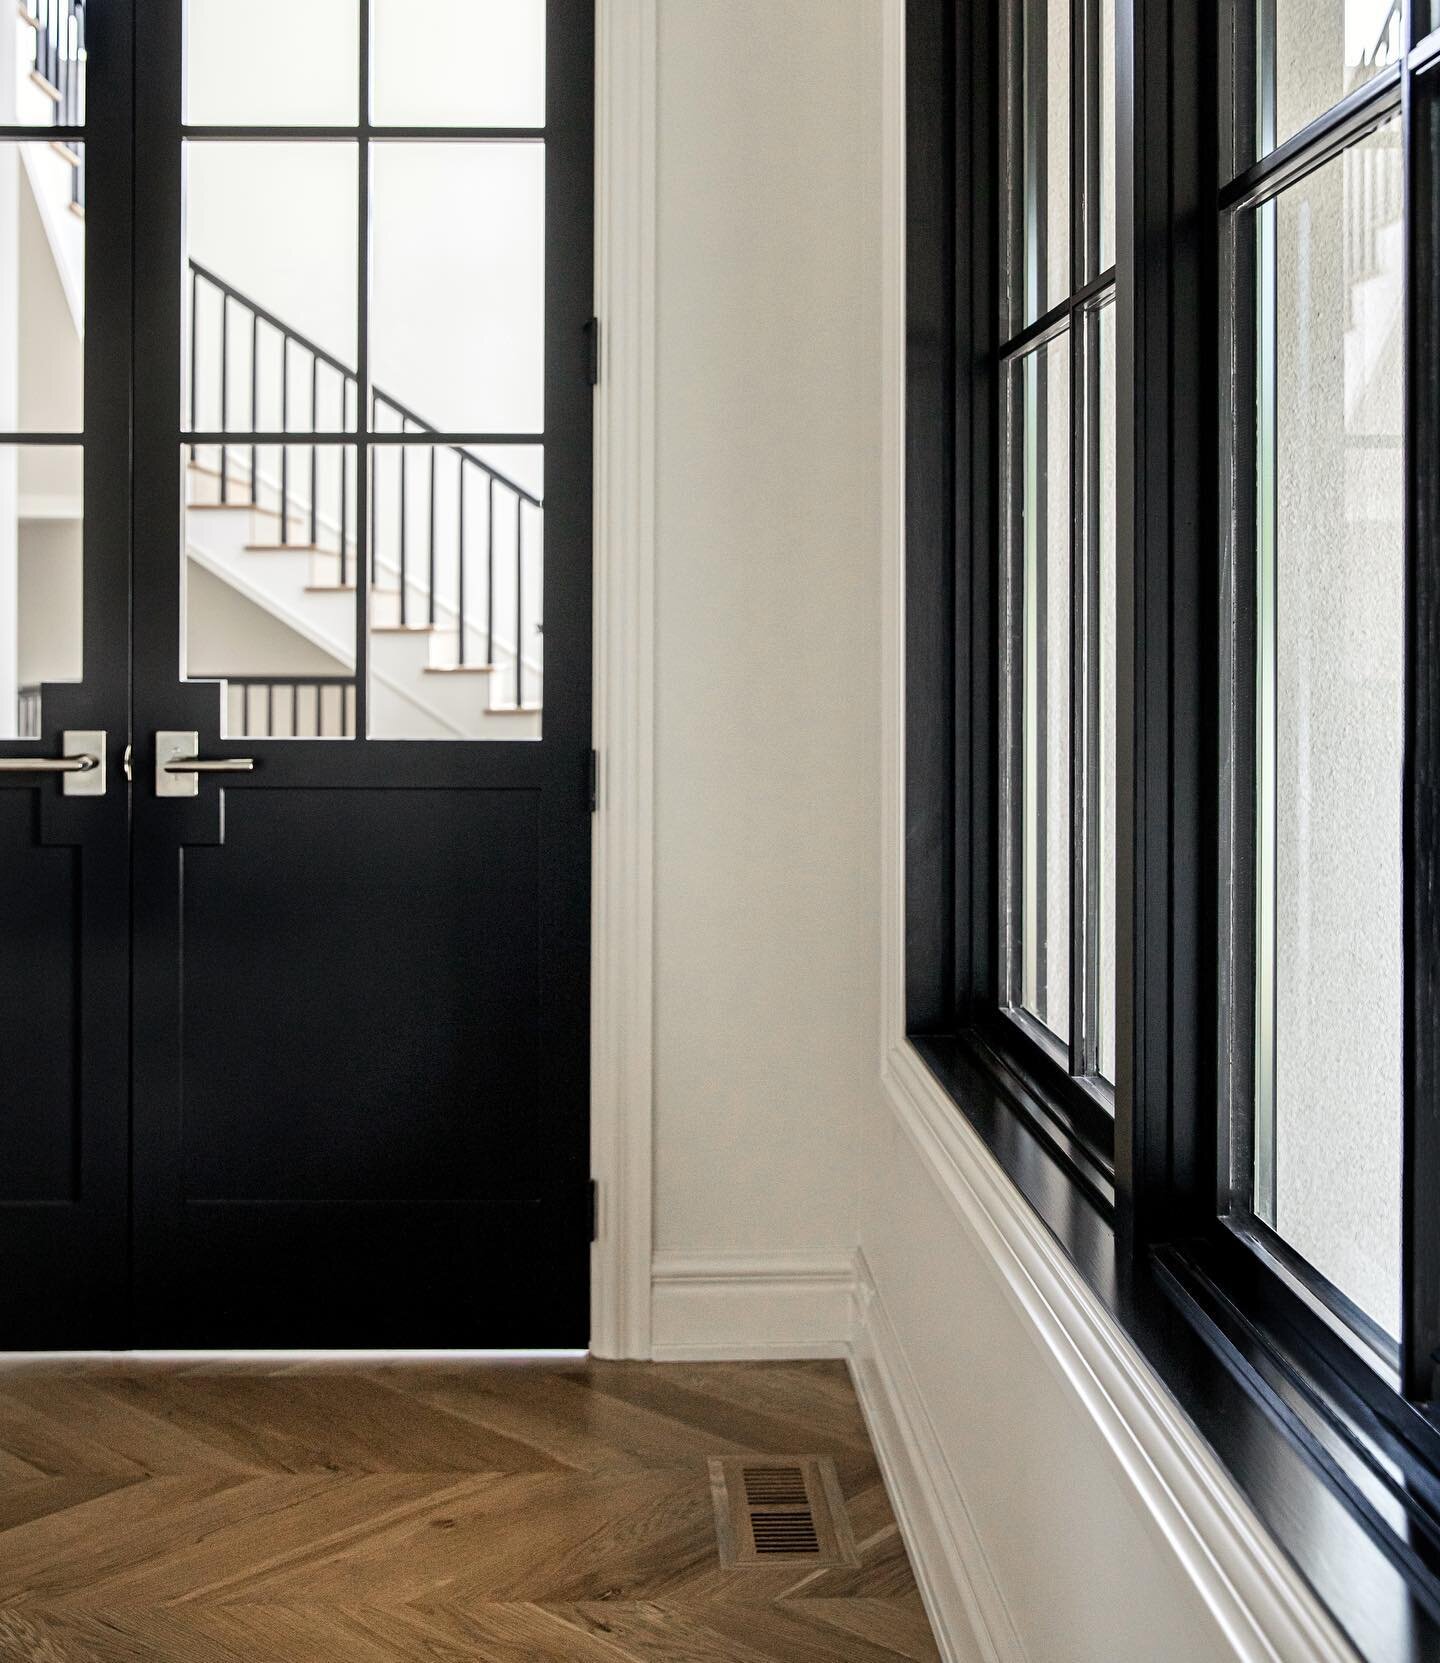 Little details that make all of the difference, a chevron pattern for the home office, the backplate detail on the French doors, and the stained wood windows, oh, and that black railing peeking through on the staircase. 
.
.
.
.
.
.
#chevronpattern #